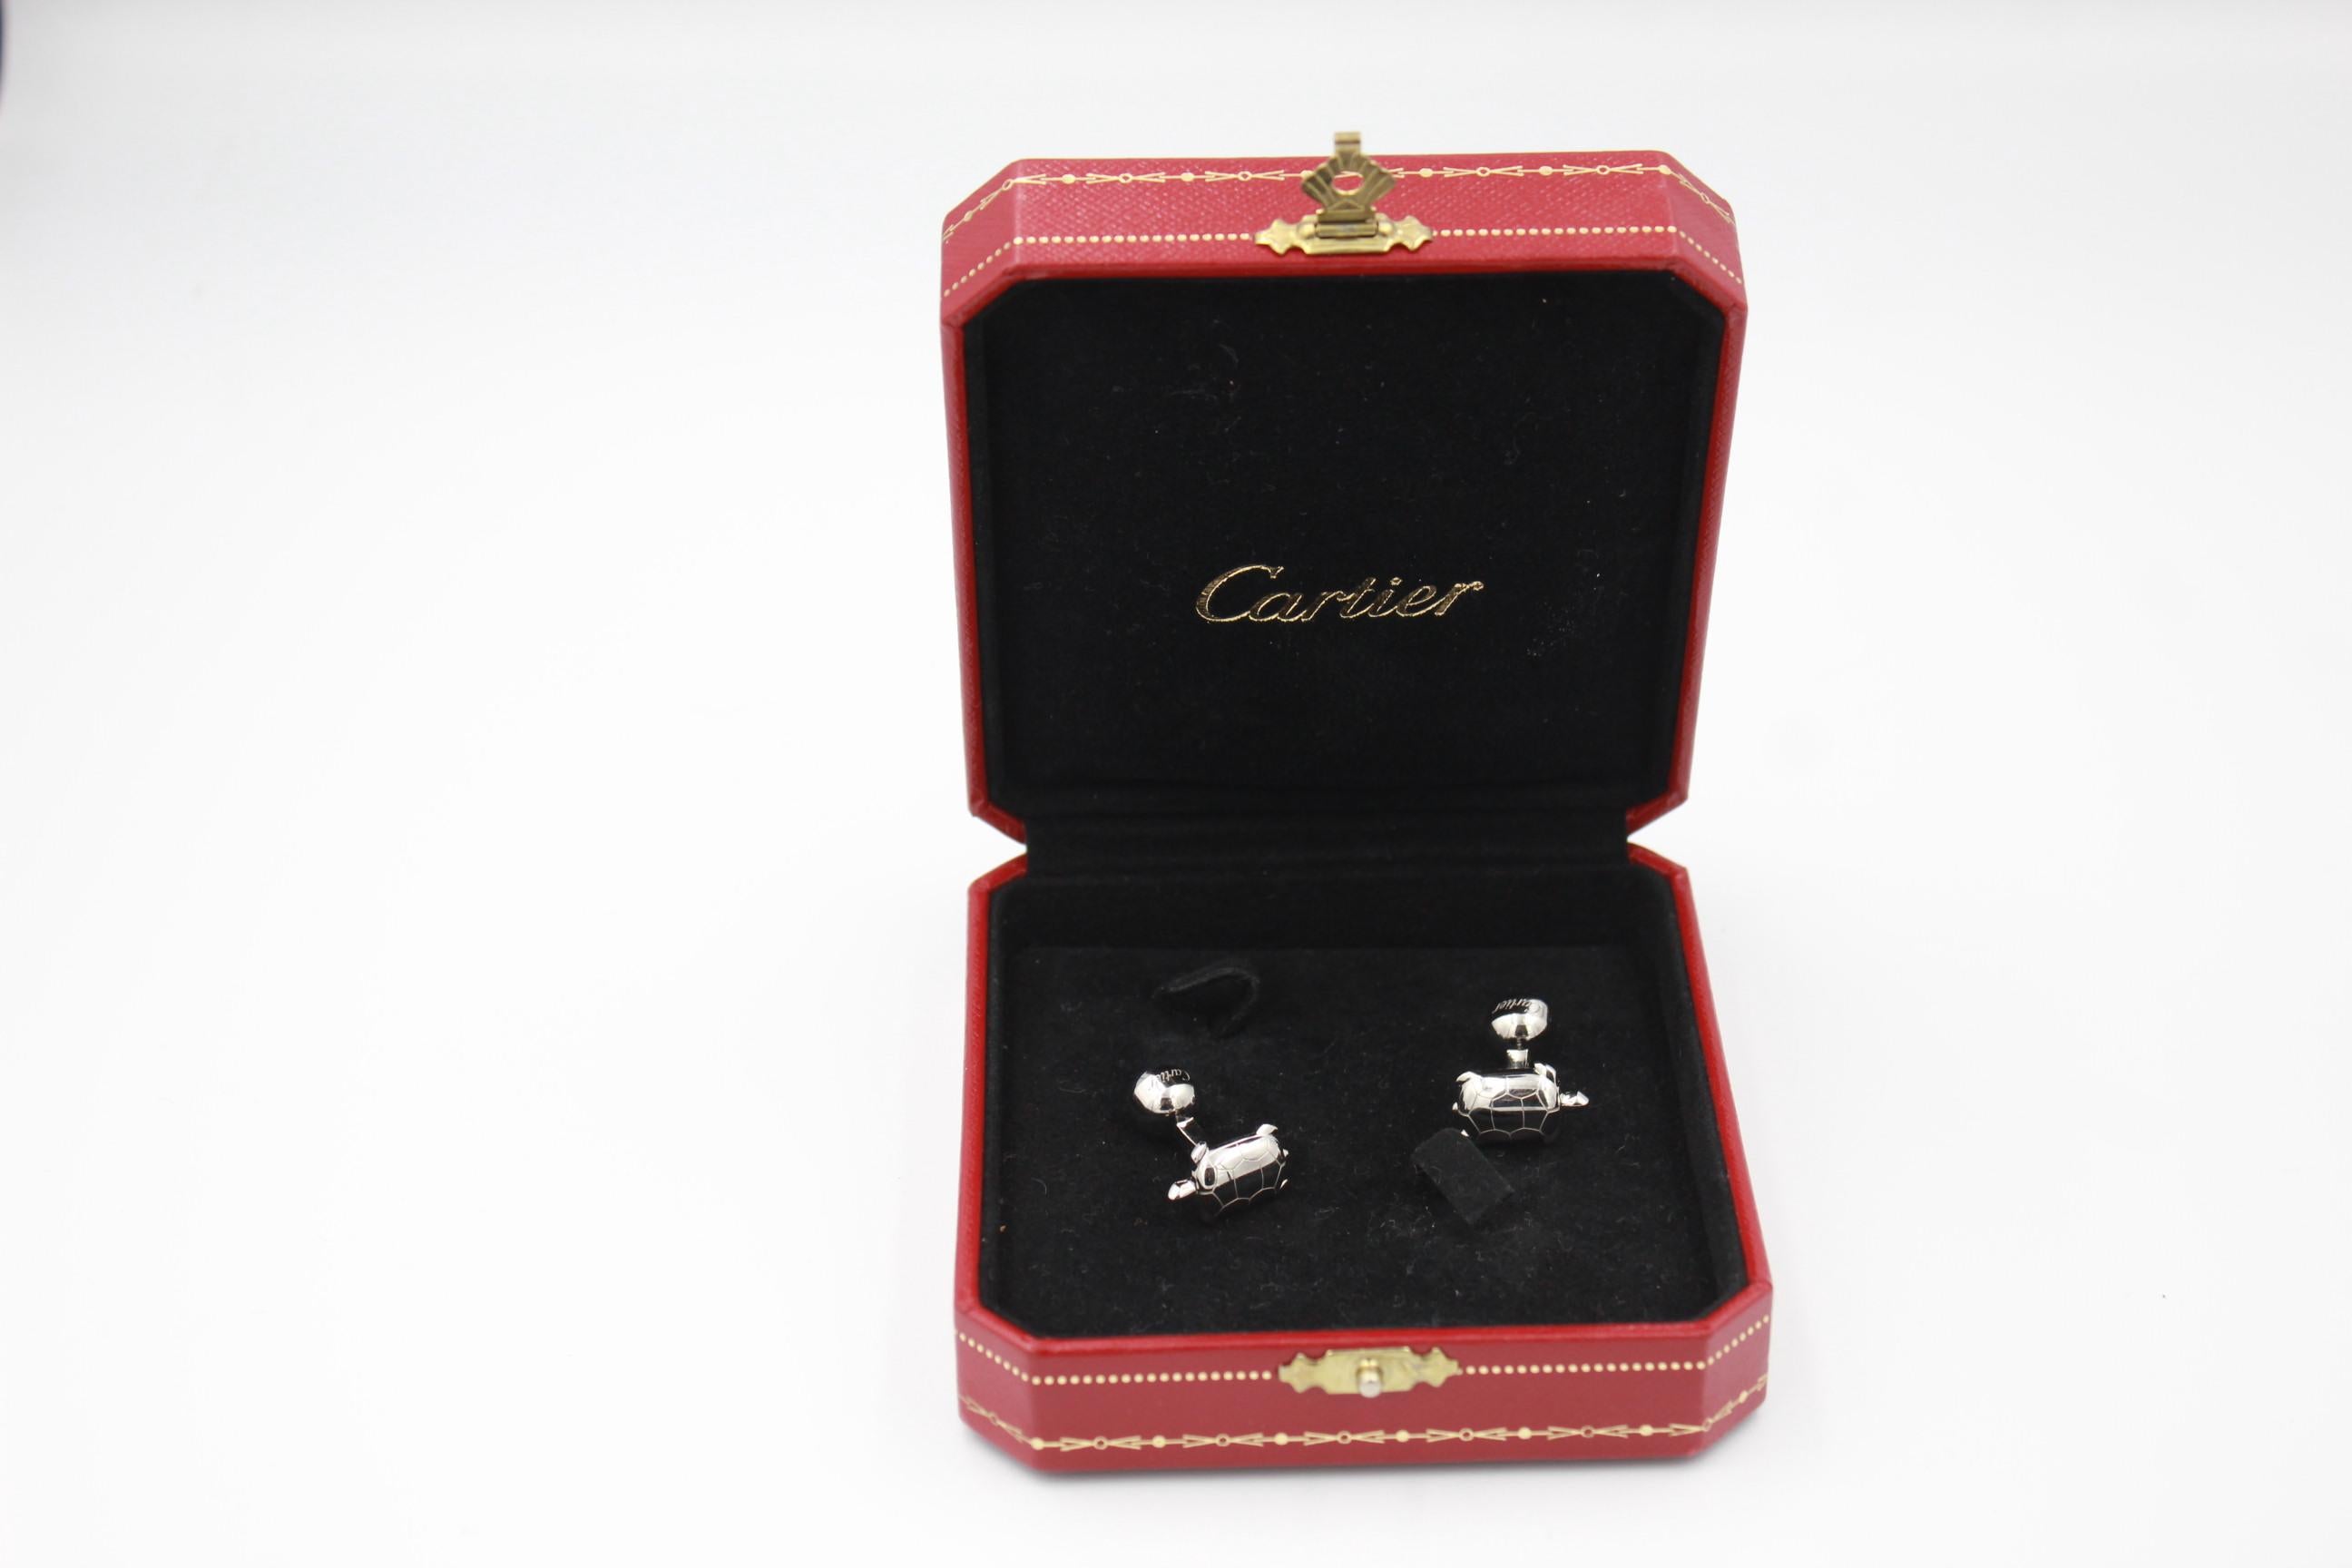 Nice pair of Cartier silver cufflinks in the shape of a turtle.
no longer produced
With box
Really god condition